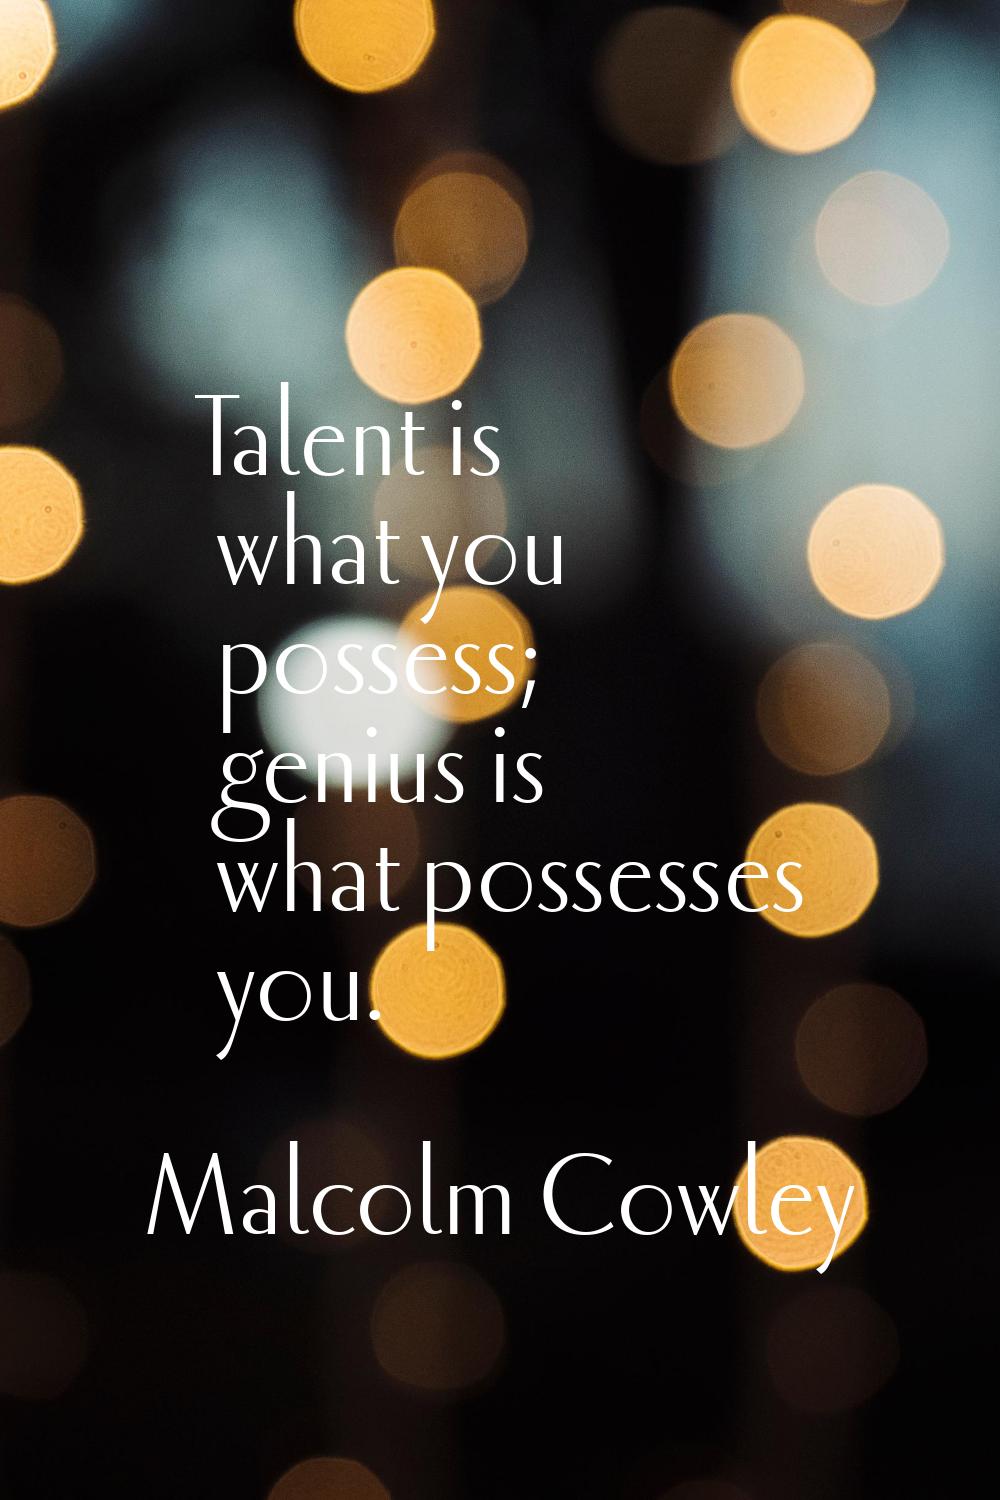 Talent is what you possess; genius is what possesses you.